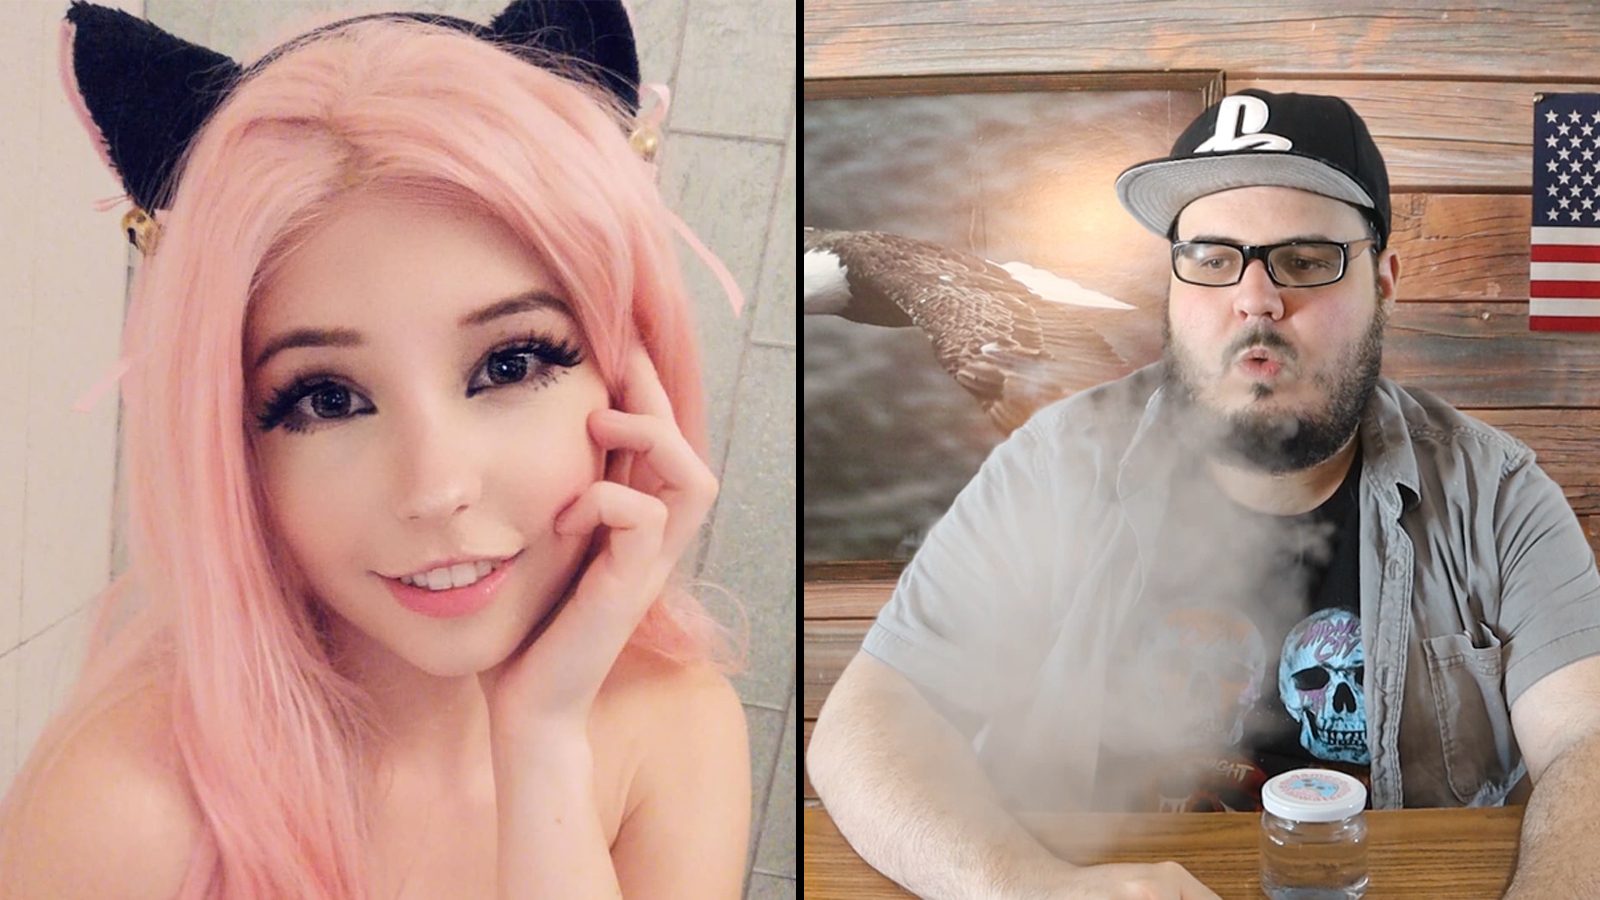 One YouTuber said he vaped Belle Delphine's bath water, you know, ...